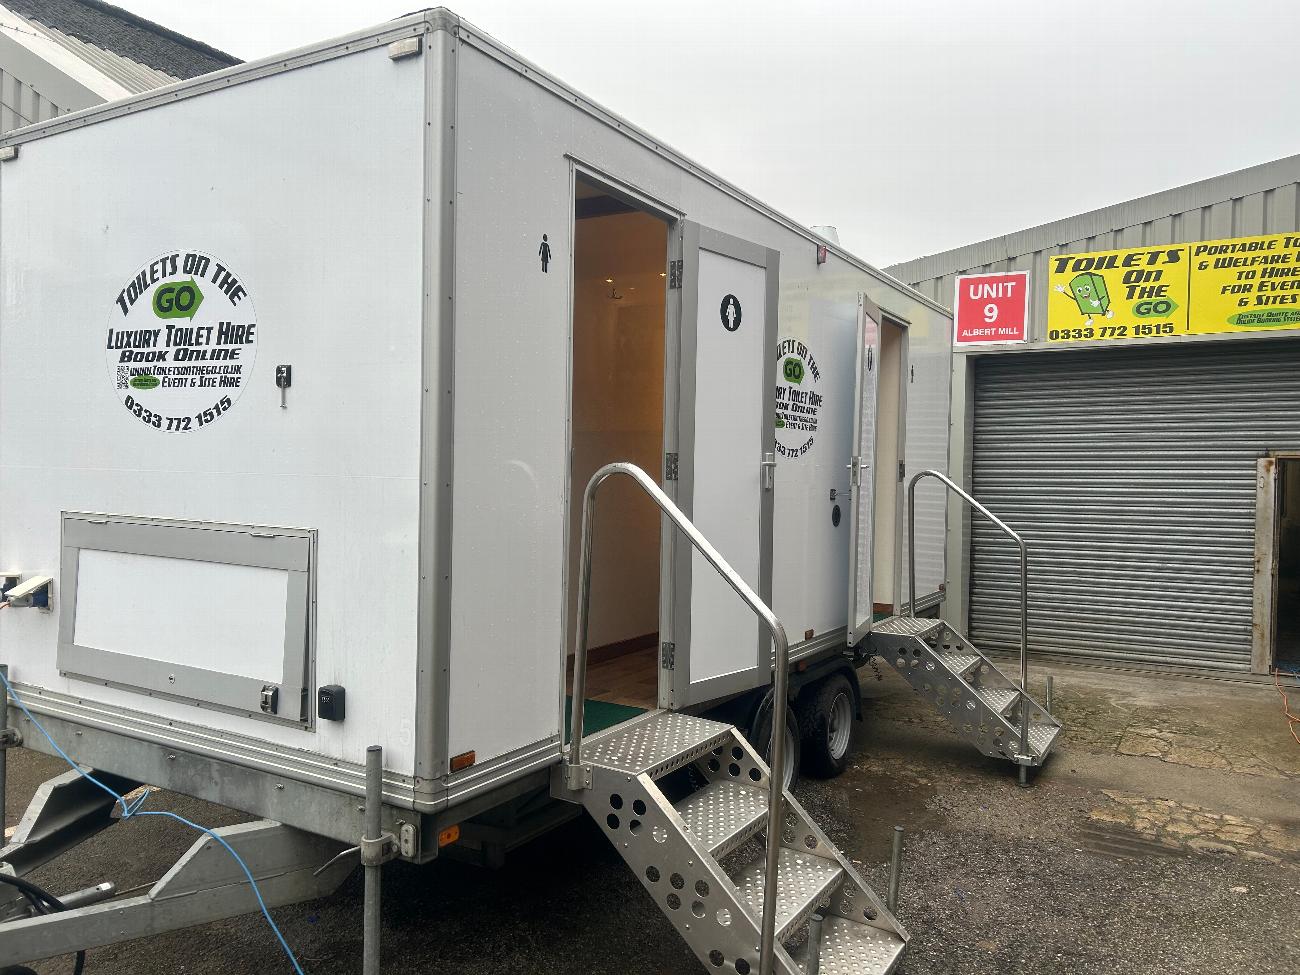 Portable Toilet Loo Hire Events and site rental Book Online gallery image 6